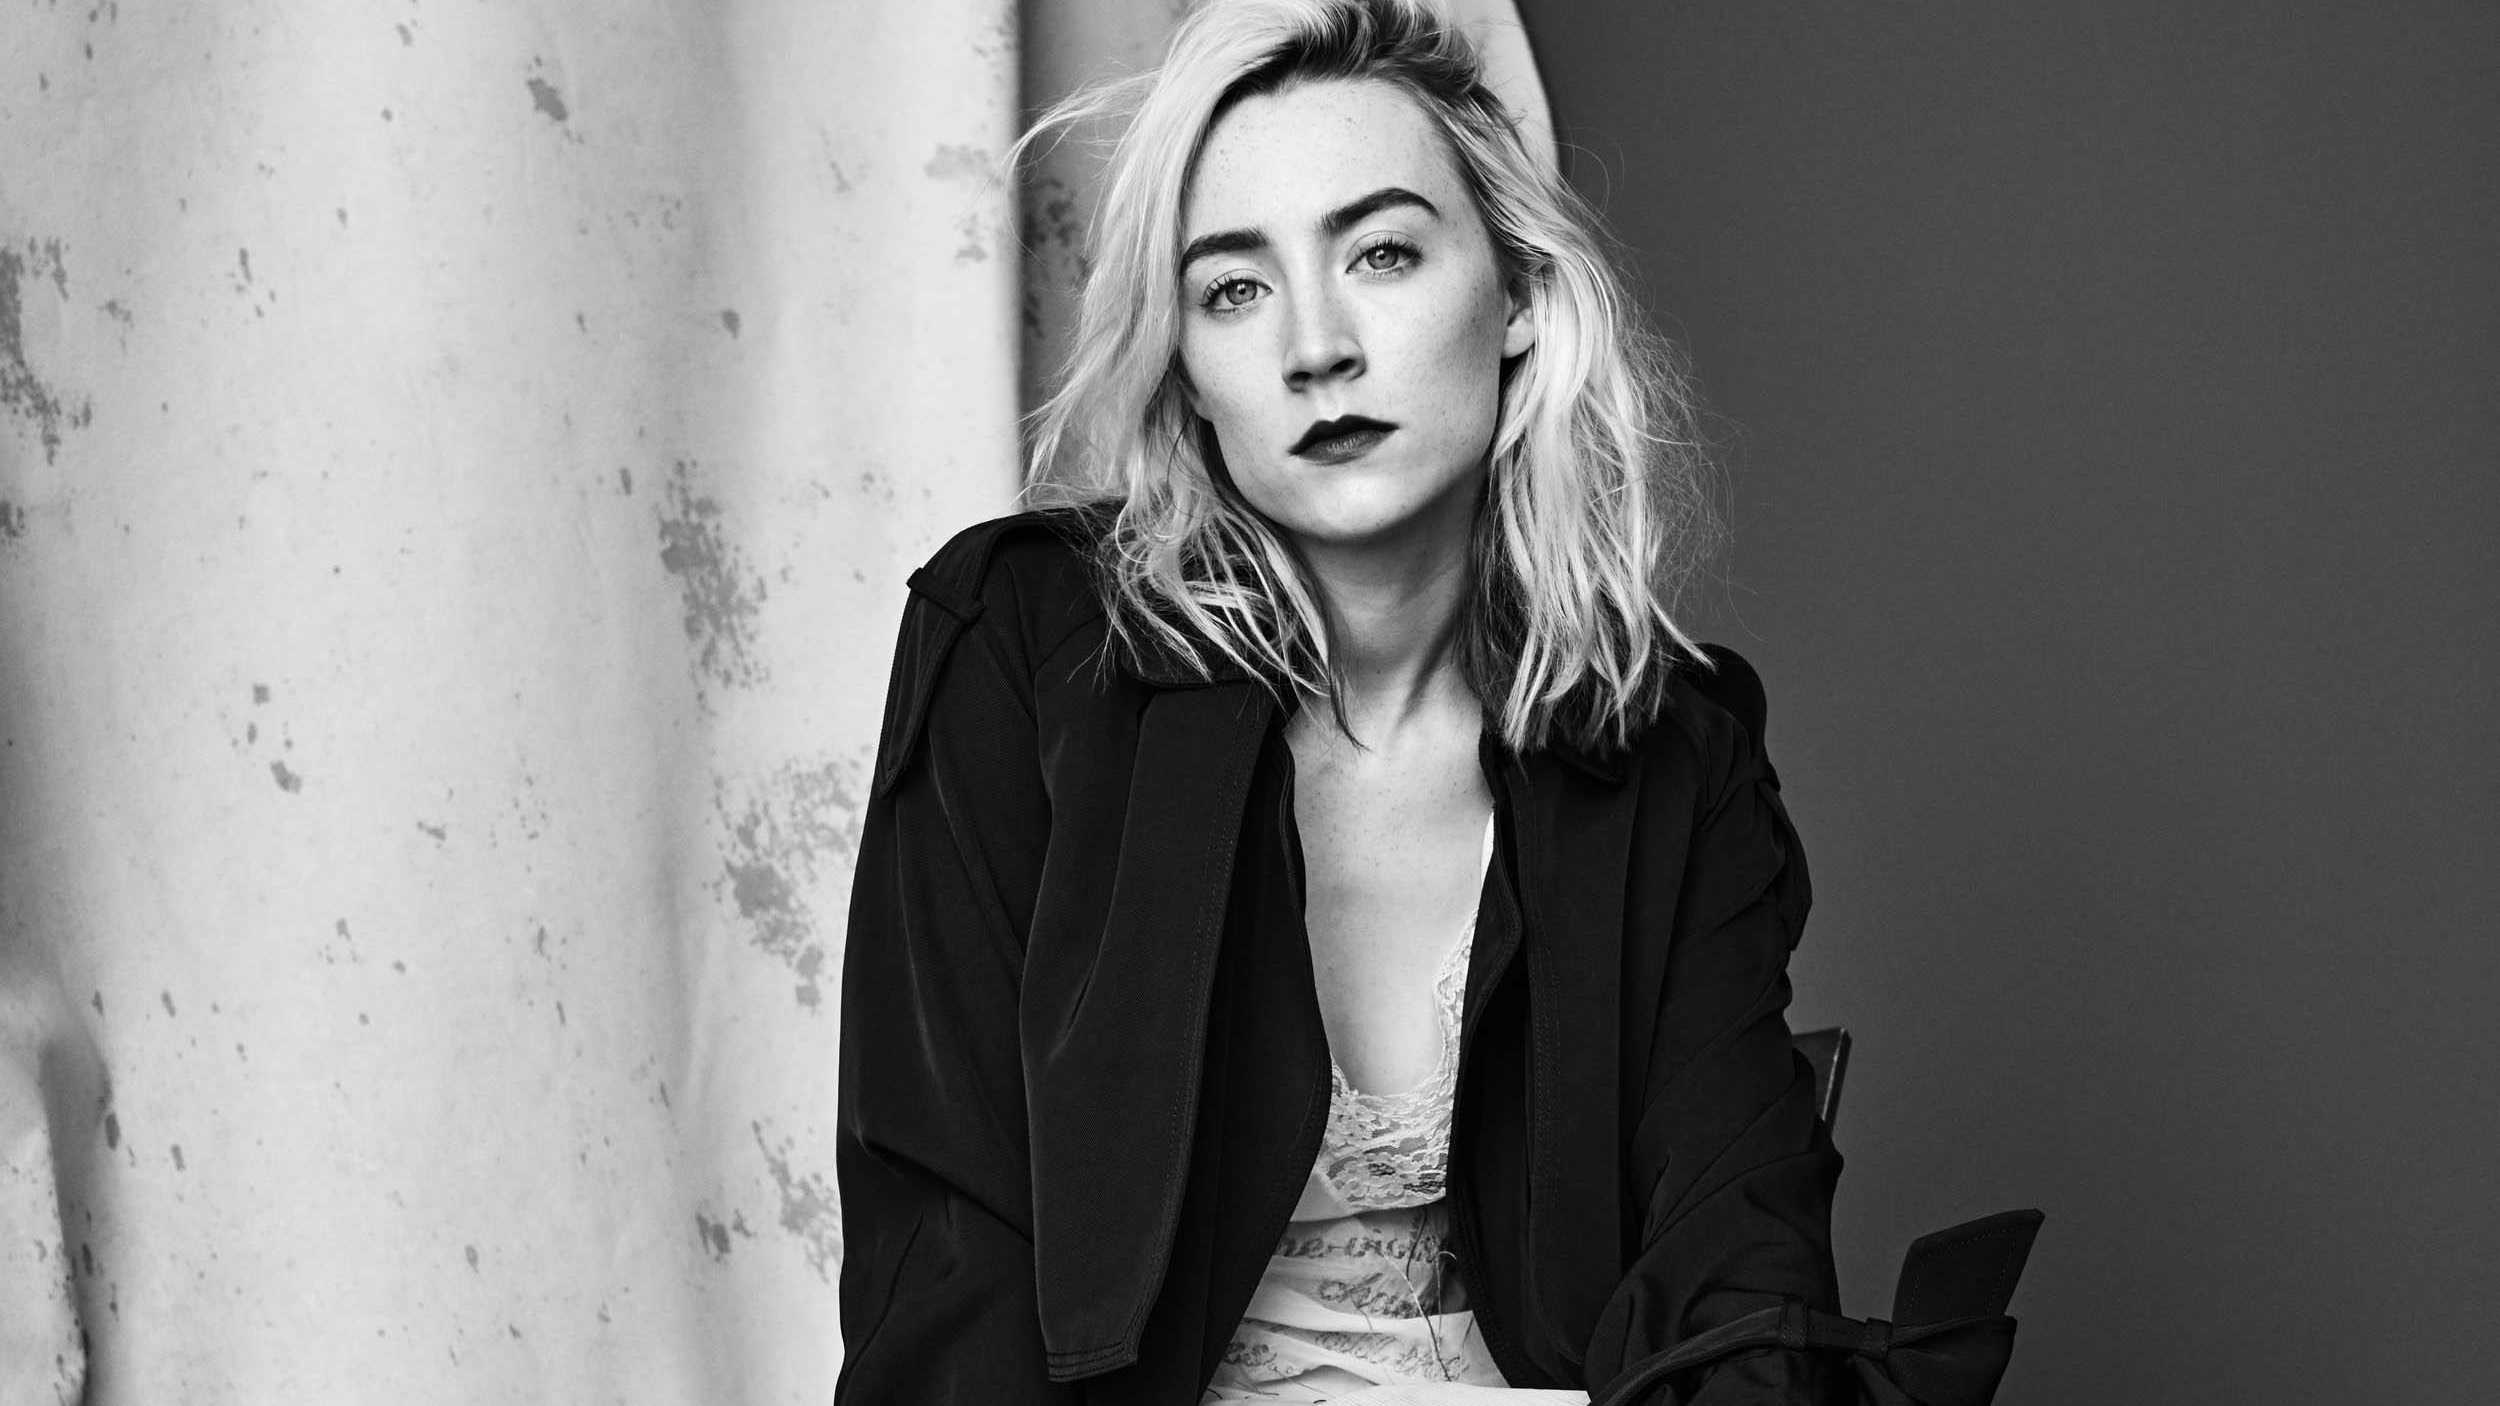 Saoirse Ronan Black And White Portrait Wallpaper Hd Celebrities 4k Wallpapers Images Photos And Background,Best Indoor Plants For Oxygen Nasa